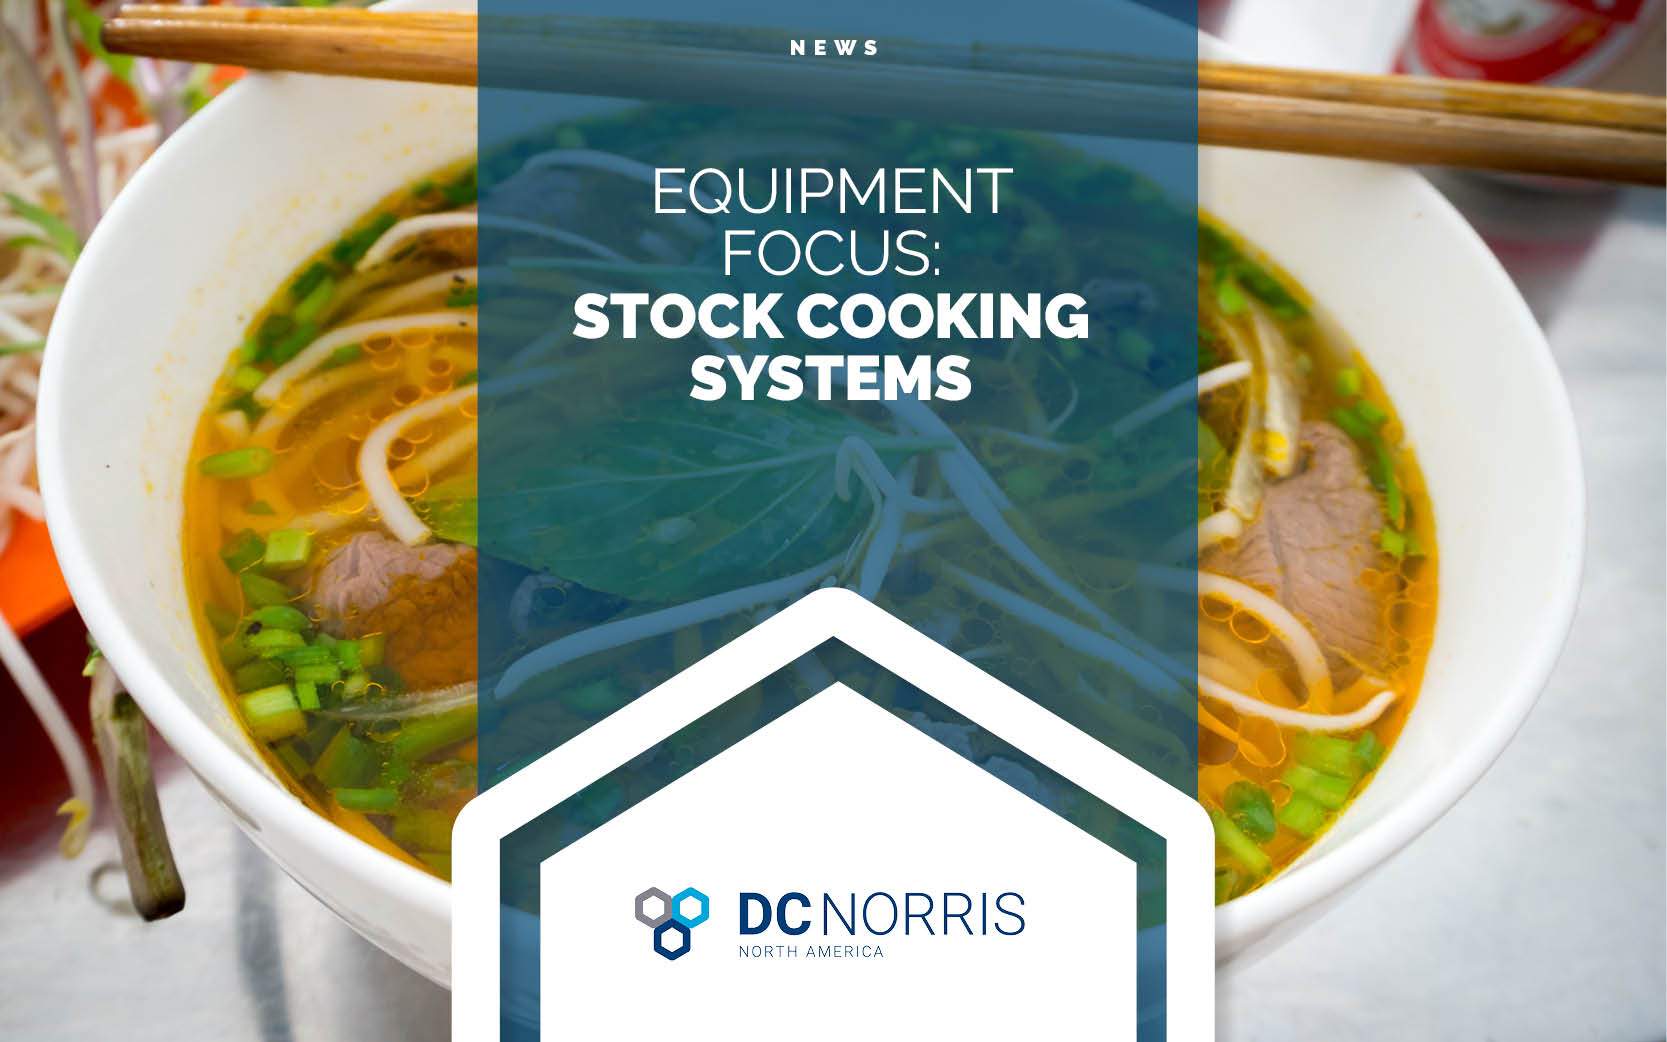 a white bowl filled with pho is in the background. Chopsticks are perched on the edge of the bowl. In the front, the headline reads Equipment Focus: Stock Cooking Systems. The headline is just above the DC Norris North America logo